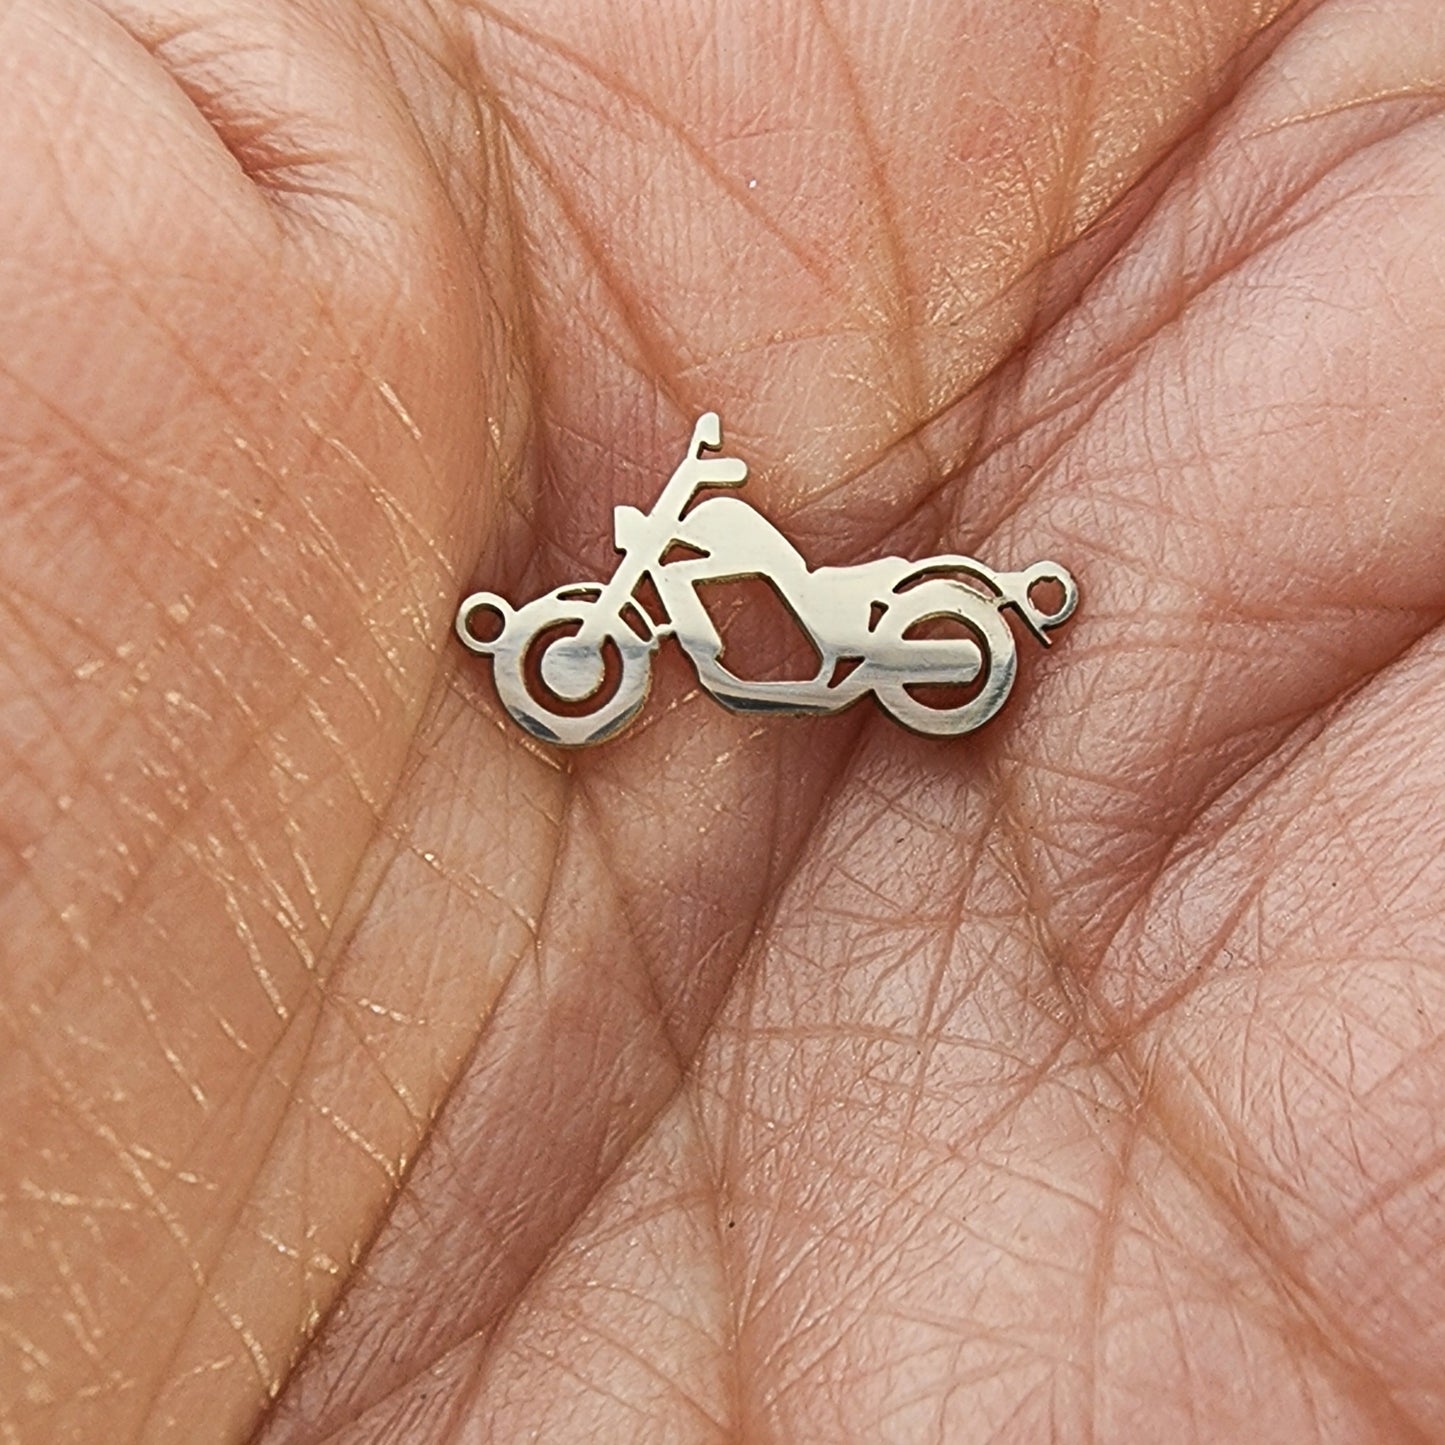 Motorcycle or Bike connector for permanent jewelry, gold filled, sterling silver, 14k and 10k gold